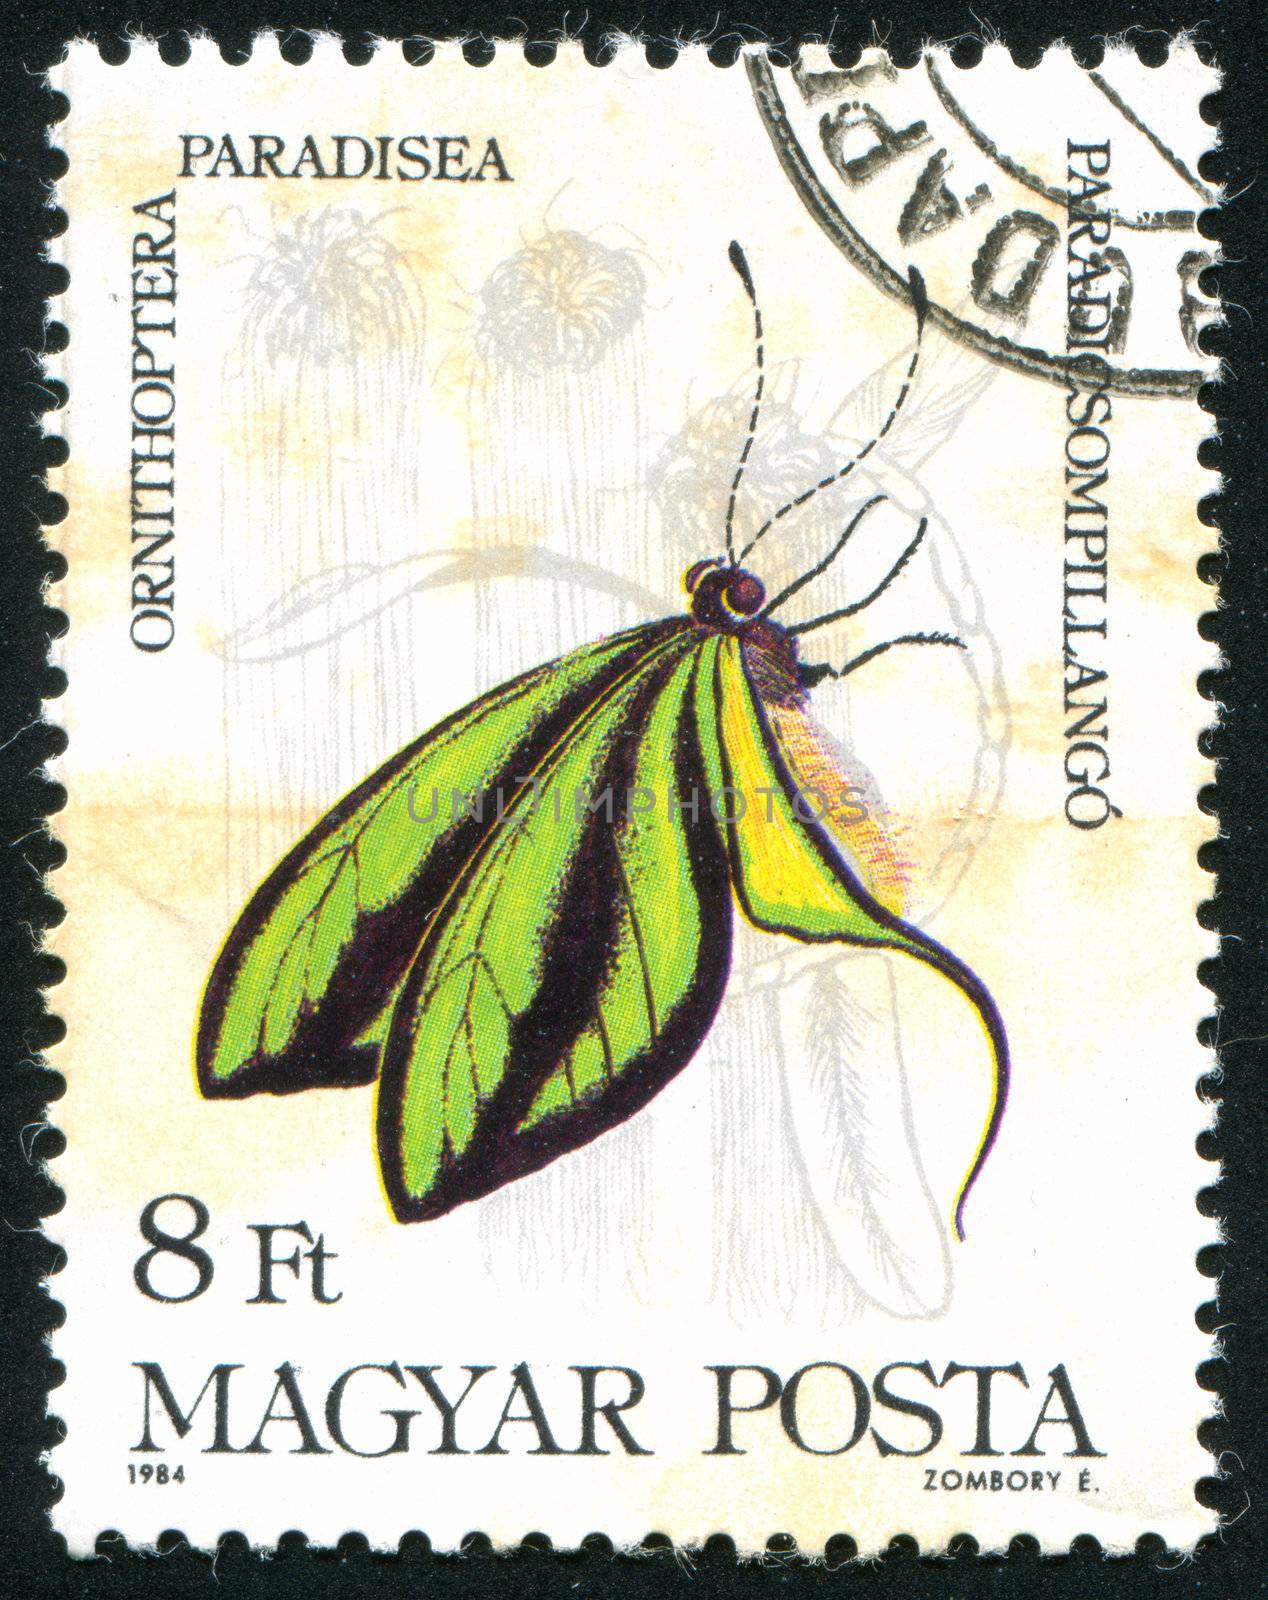 HUNGARY - CIRCA 1984: stamp printed by Hungary, shows butterfly, circa 1984